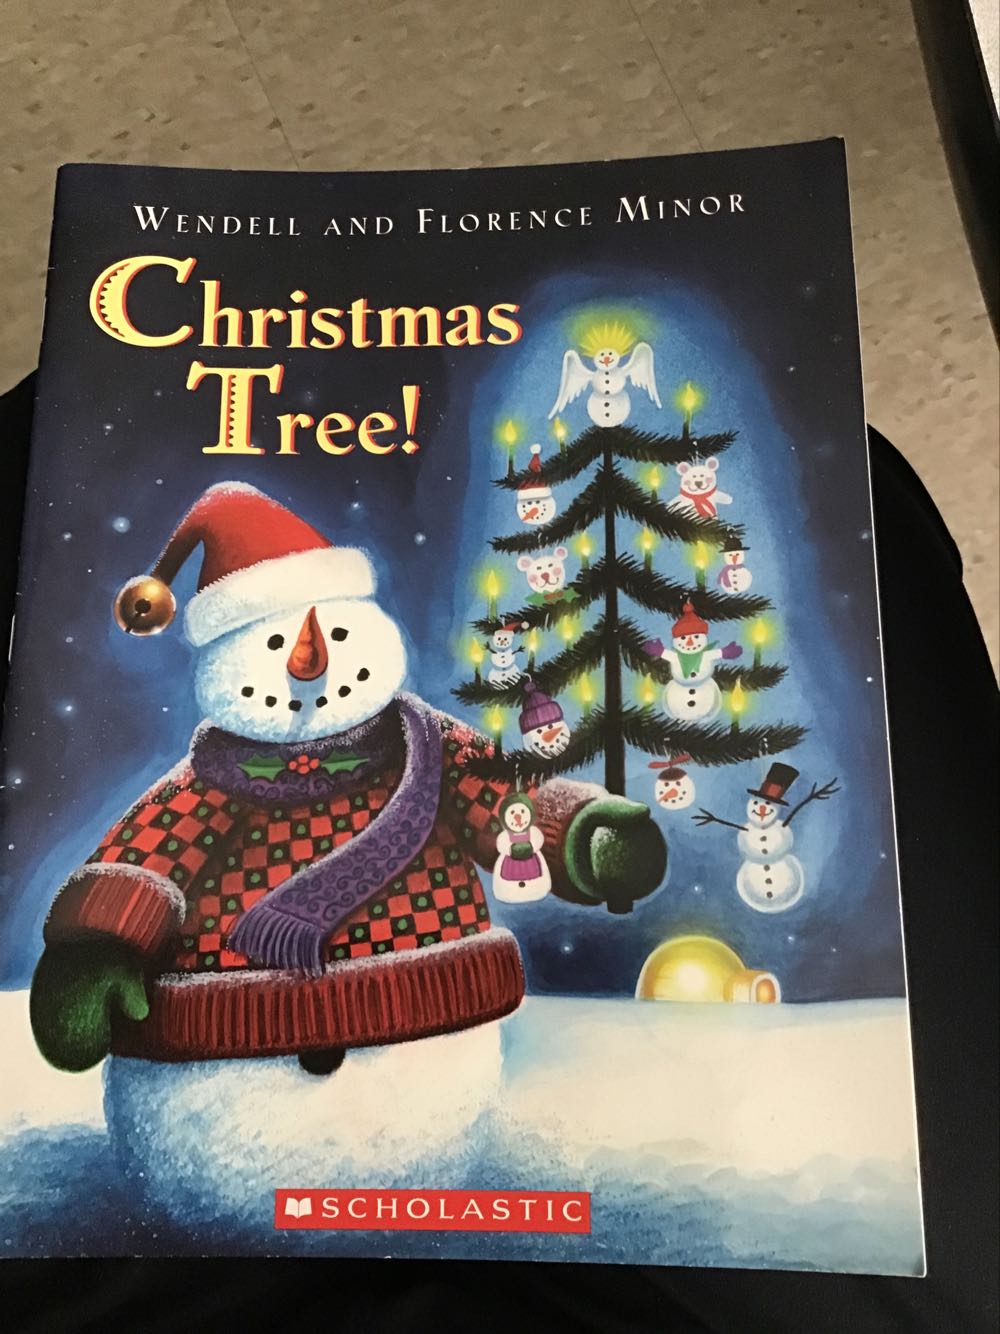 Christmas Tree! - Wendell and Florence Minor (- Paperback) book collectible [Barcode 9780545051859] - Main Image 3